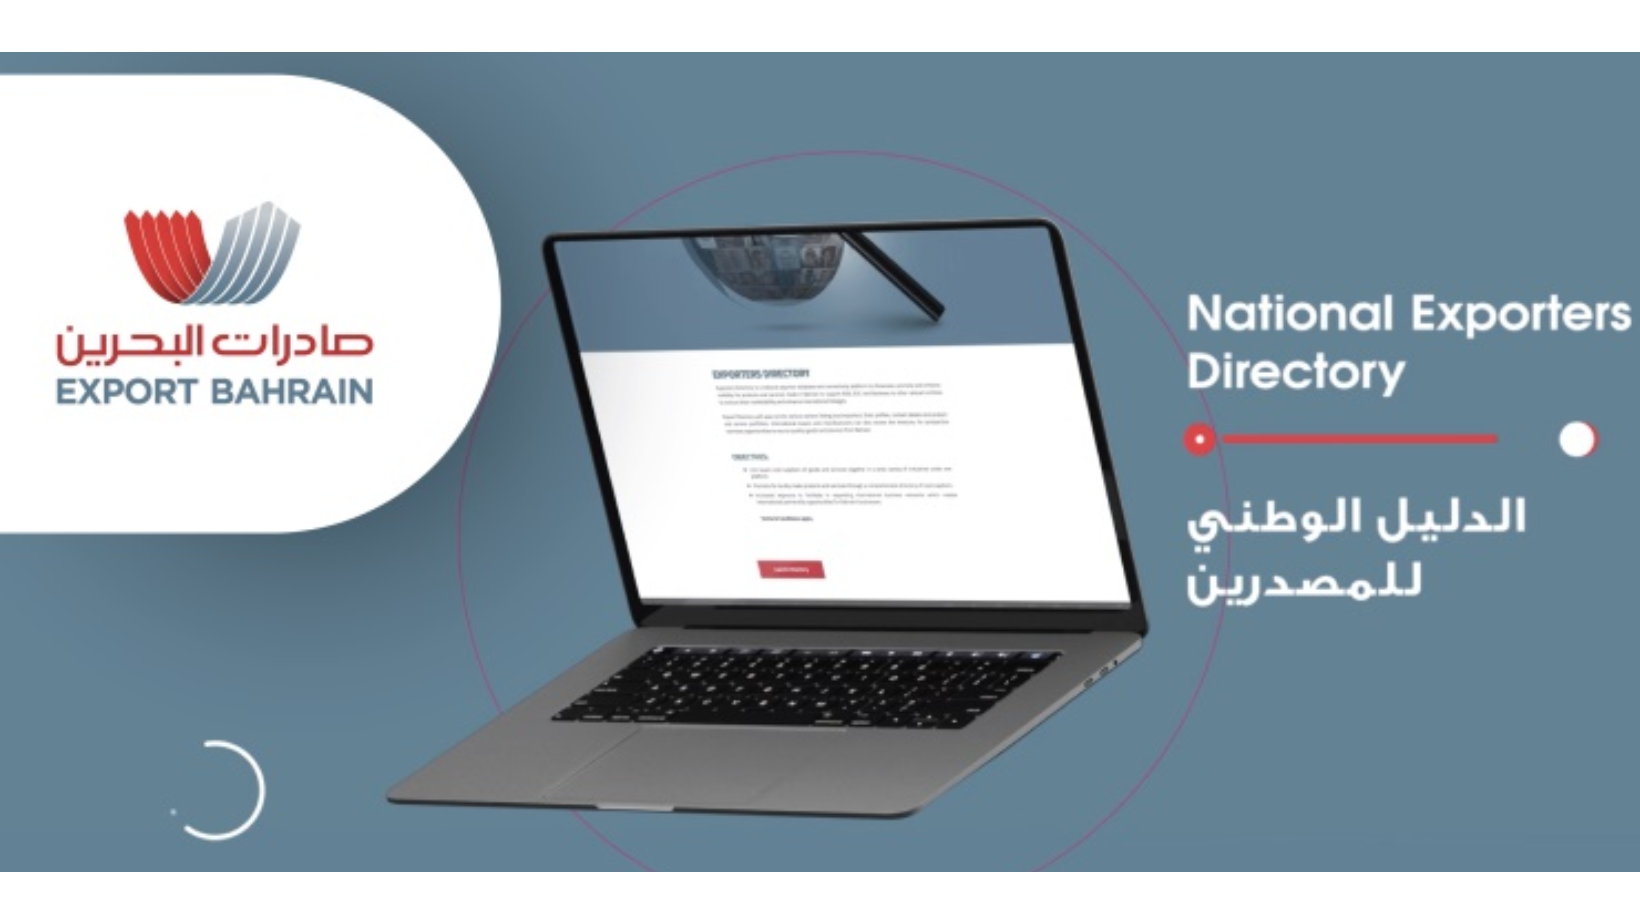 Export Bahrain, National Exporters Directory, made in Bahrain, showcase, promote, visibility, international markets, Bahraini-based businesses, products, services, bahraini business, localbh, local bahrain